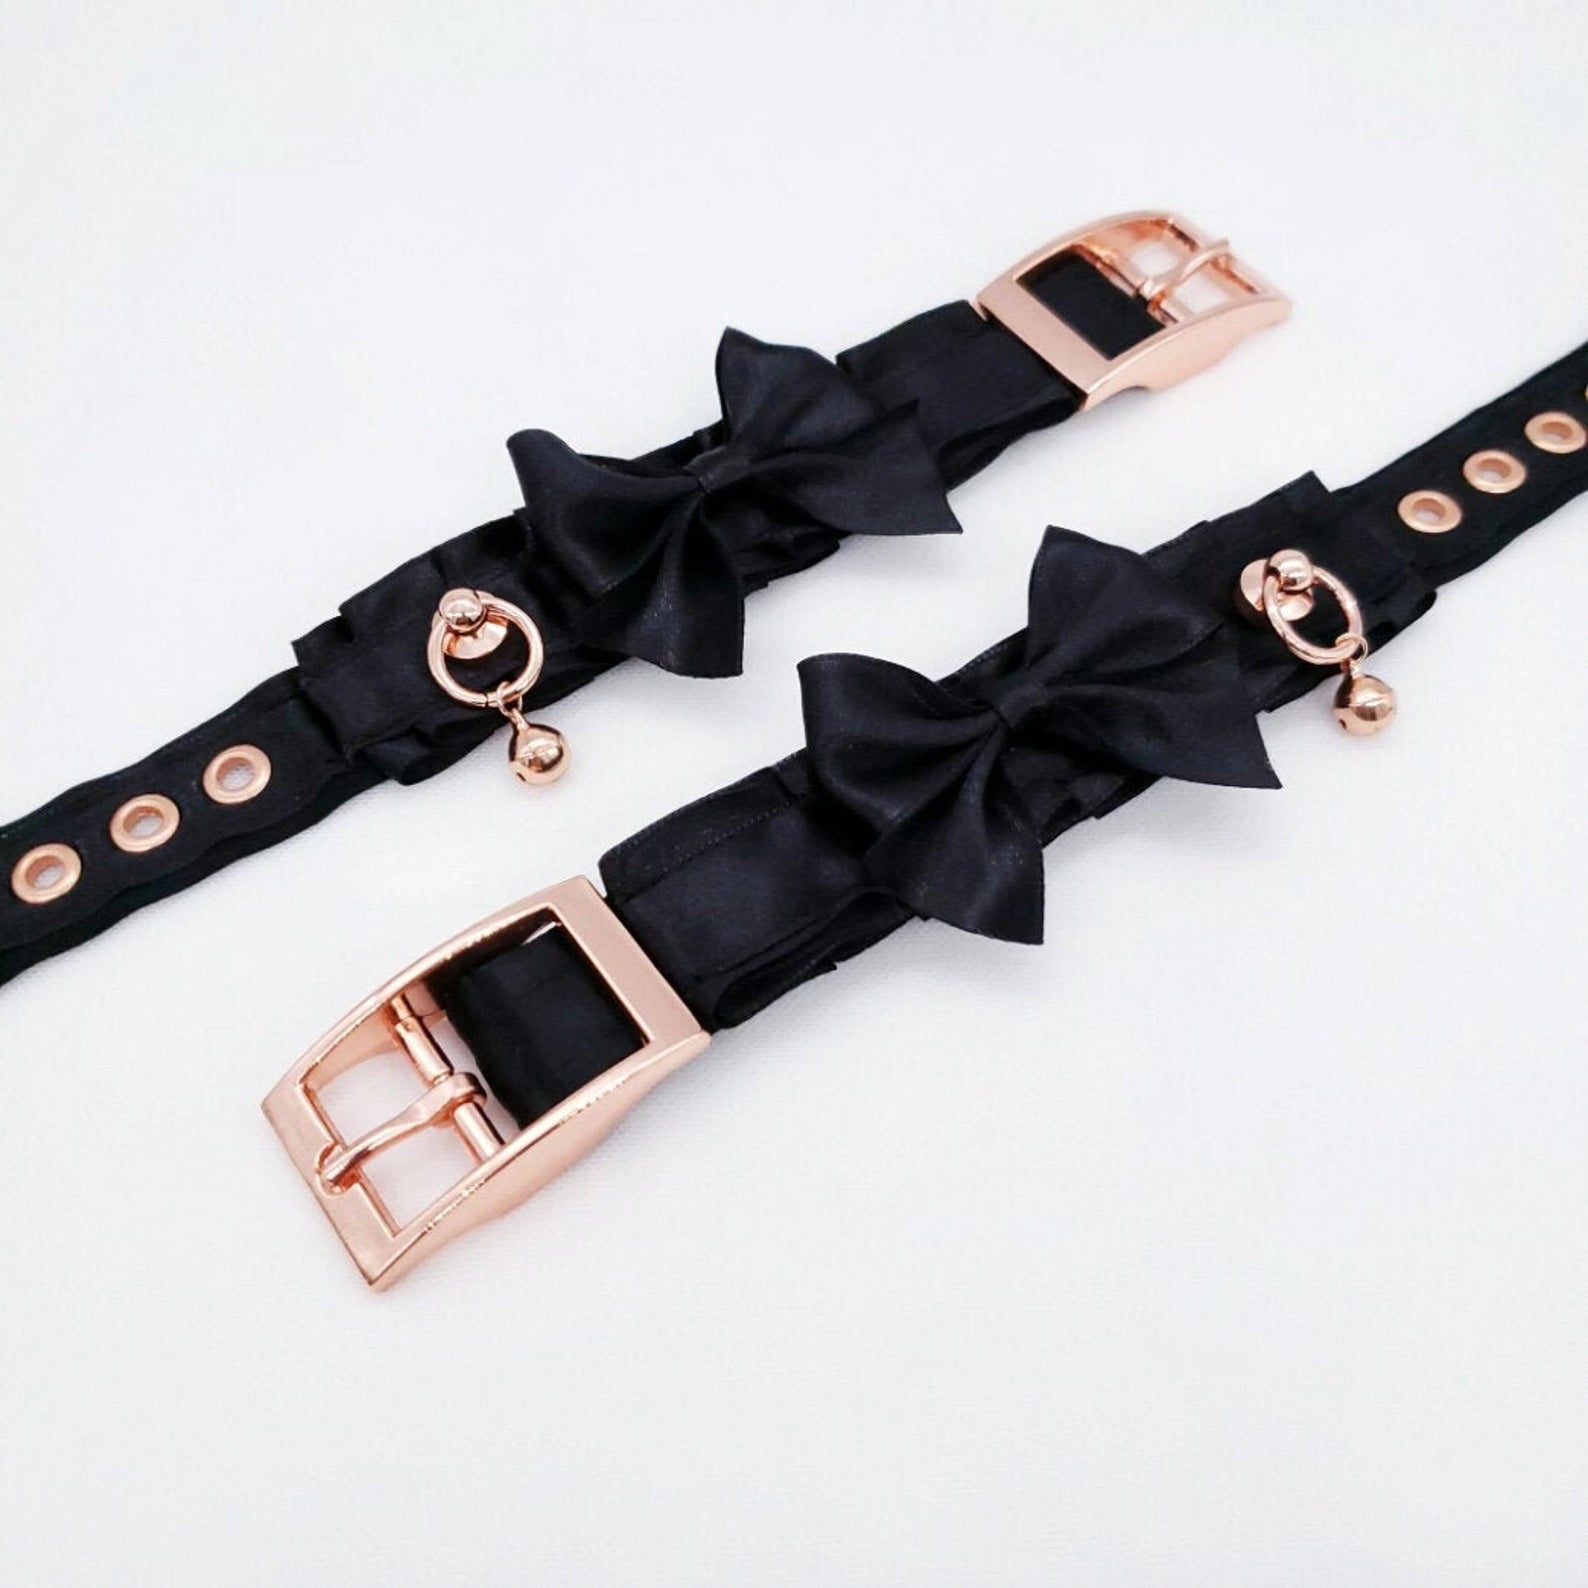 Luxury Black and Rose Gold Buckle Cuffs